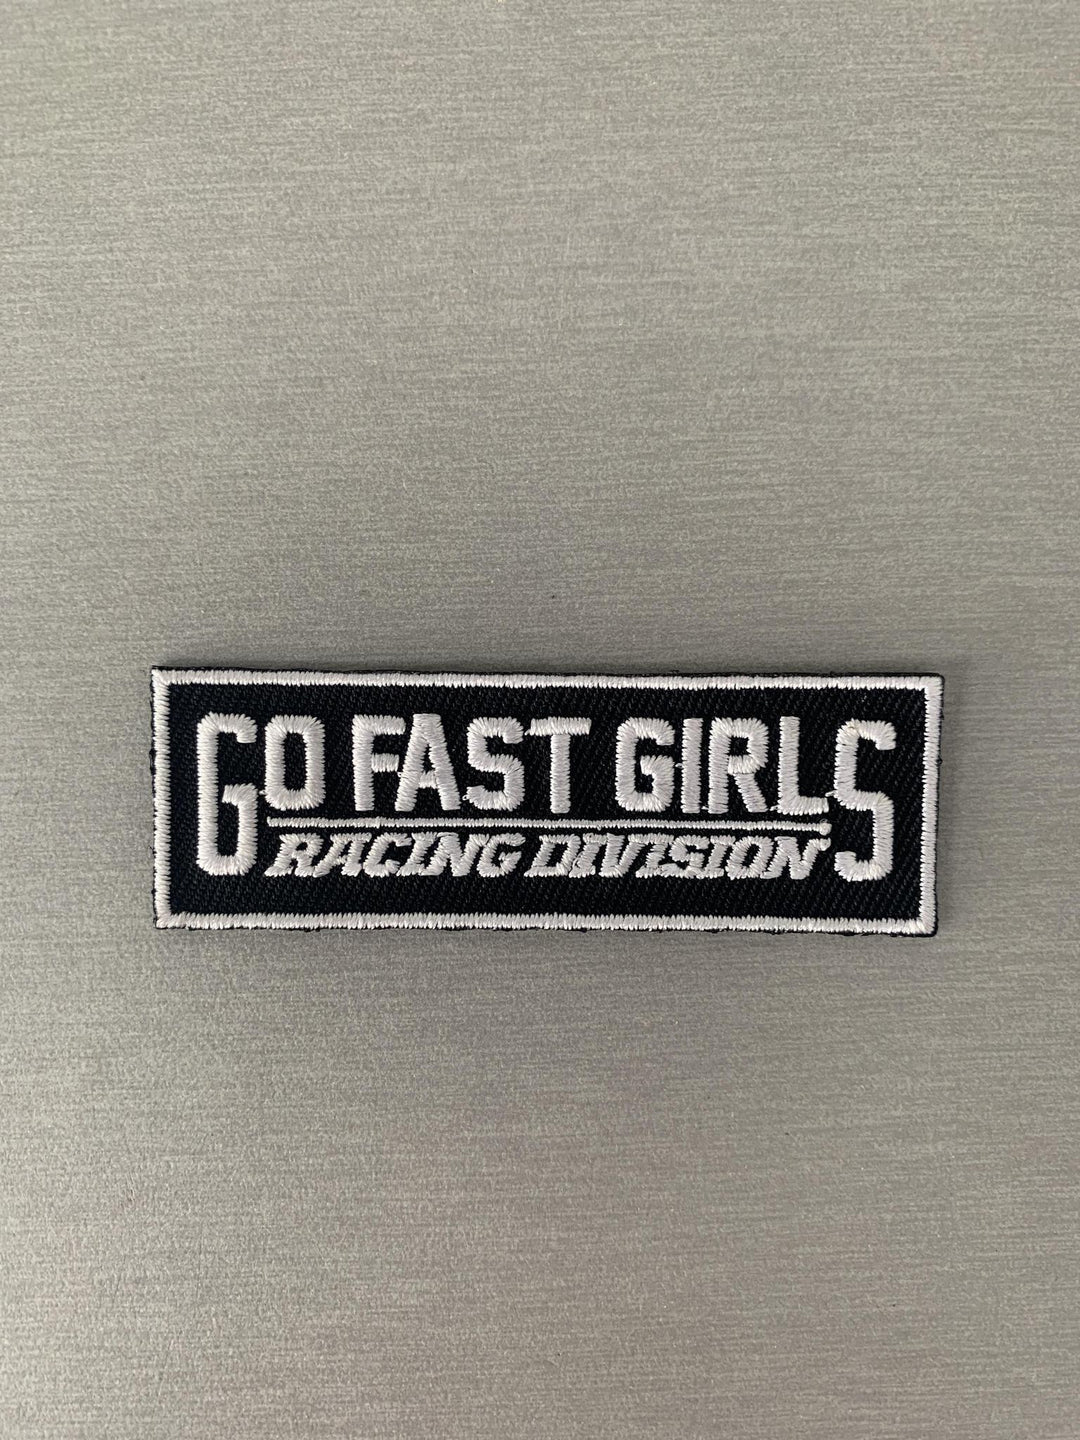 Racing Division Patches